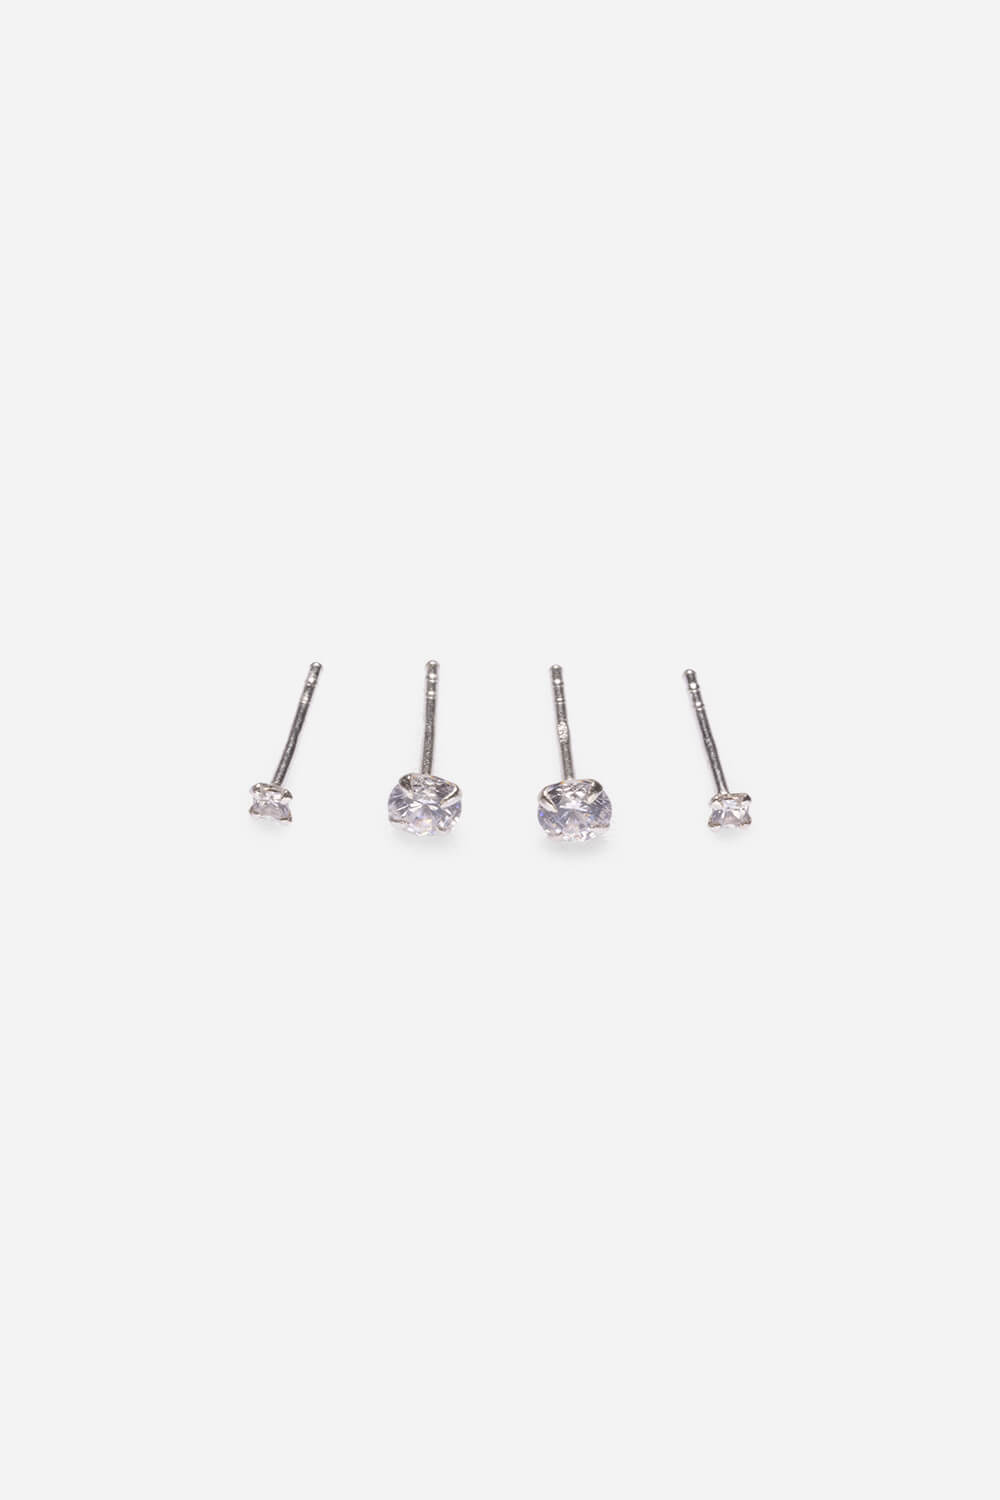 Silver Sterling Silver Cubic Zirconia Stud Earring Set, Image 2 of 2